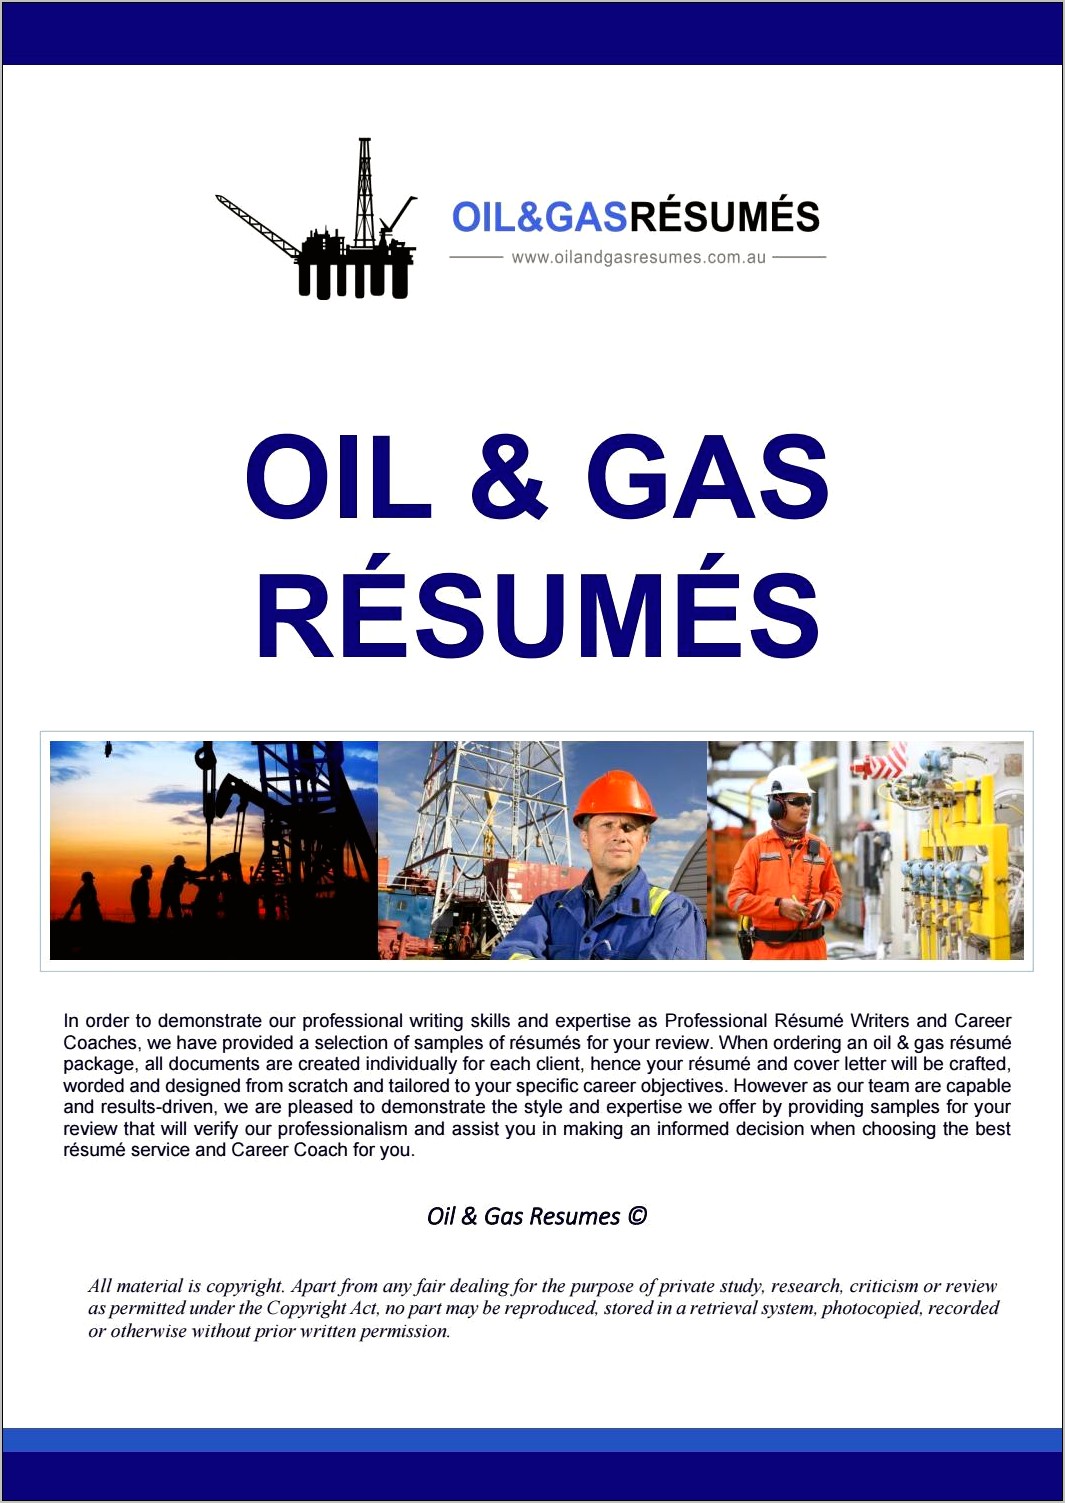 Resume Objective Examples Oil And Gas